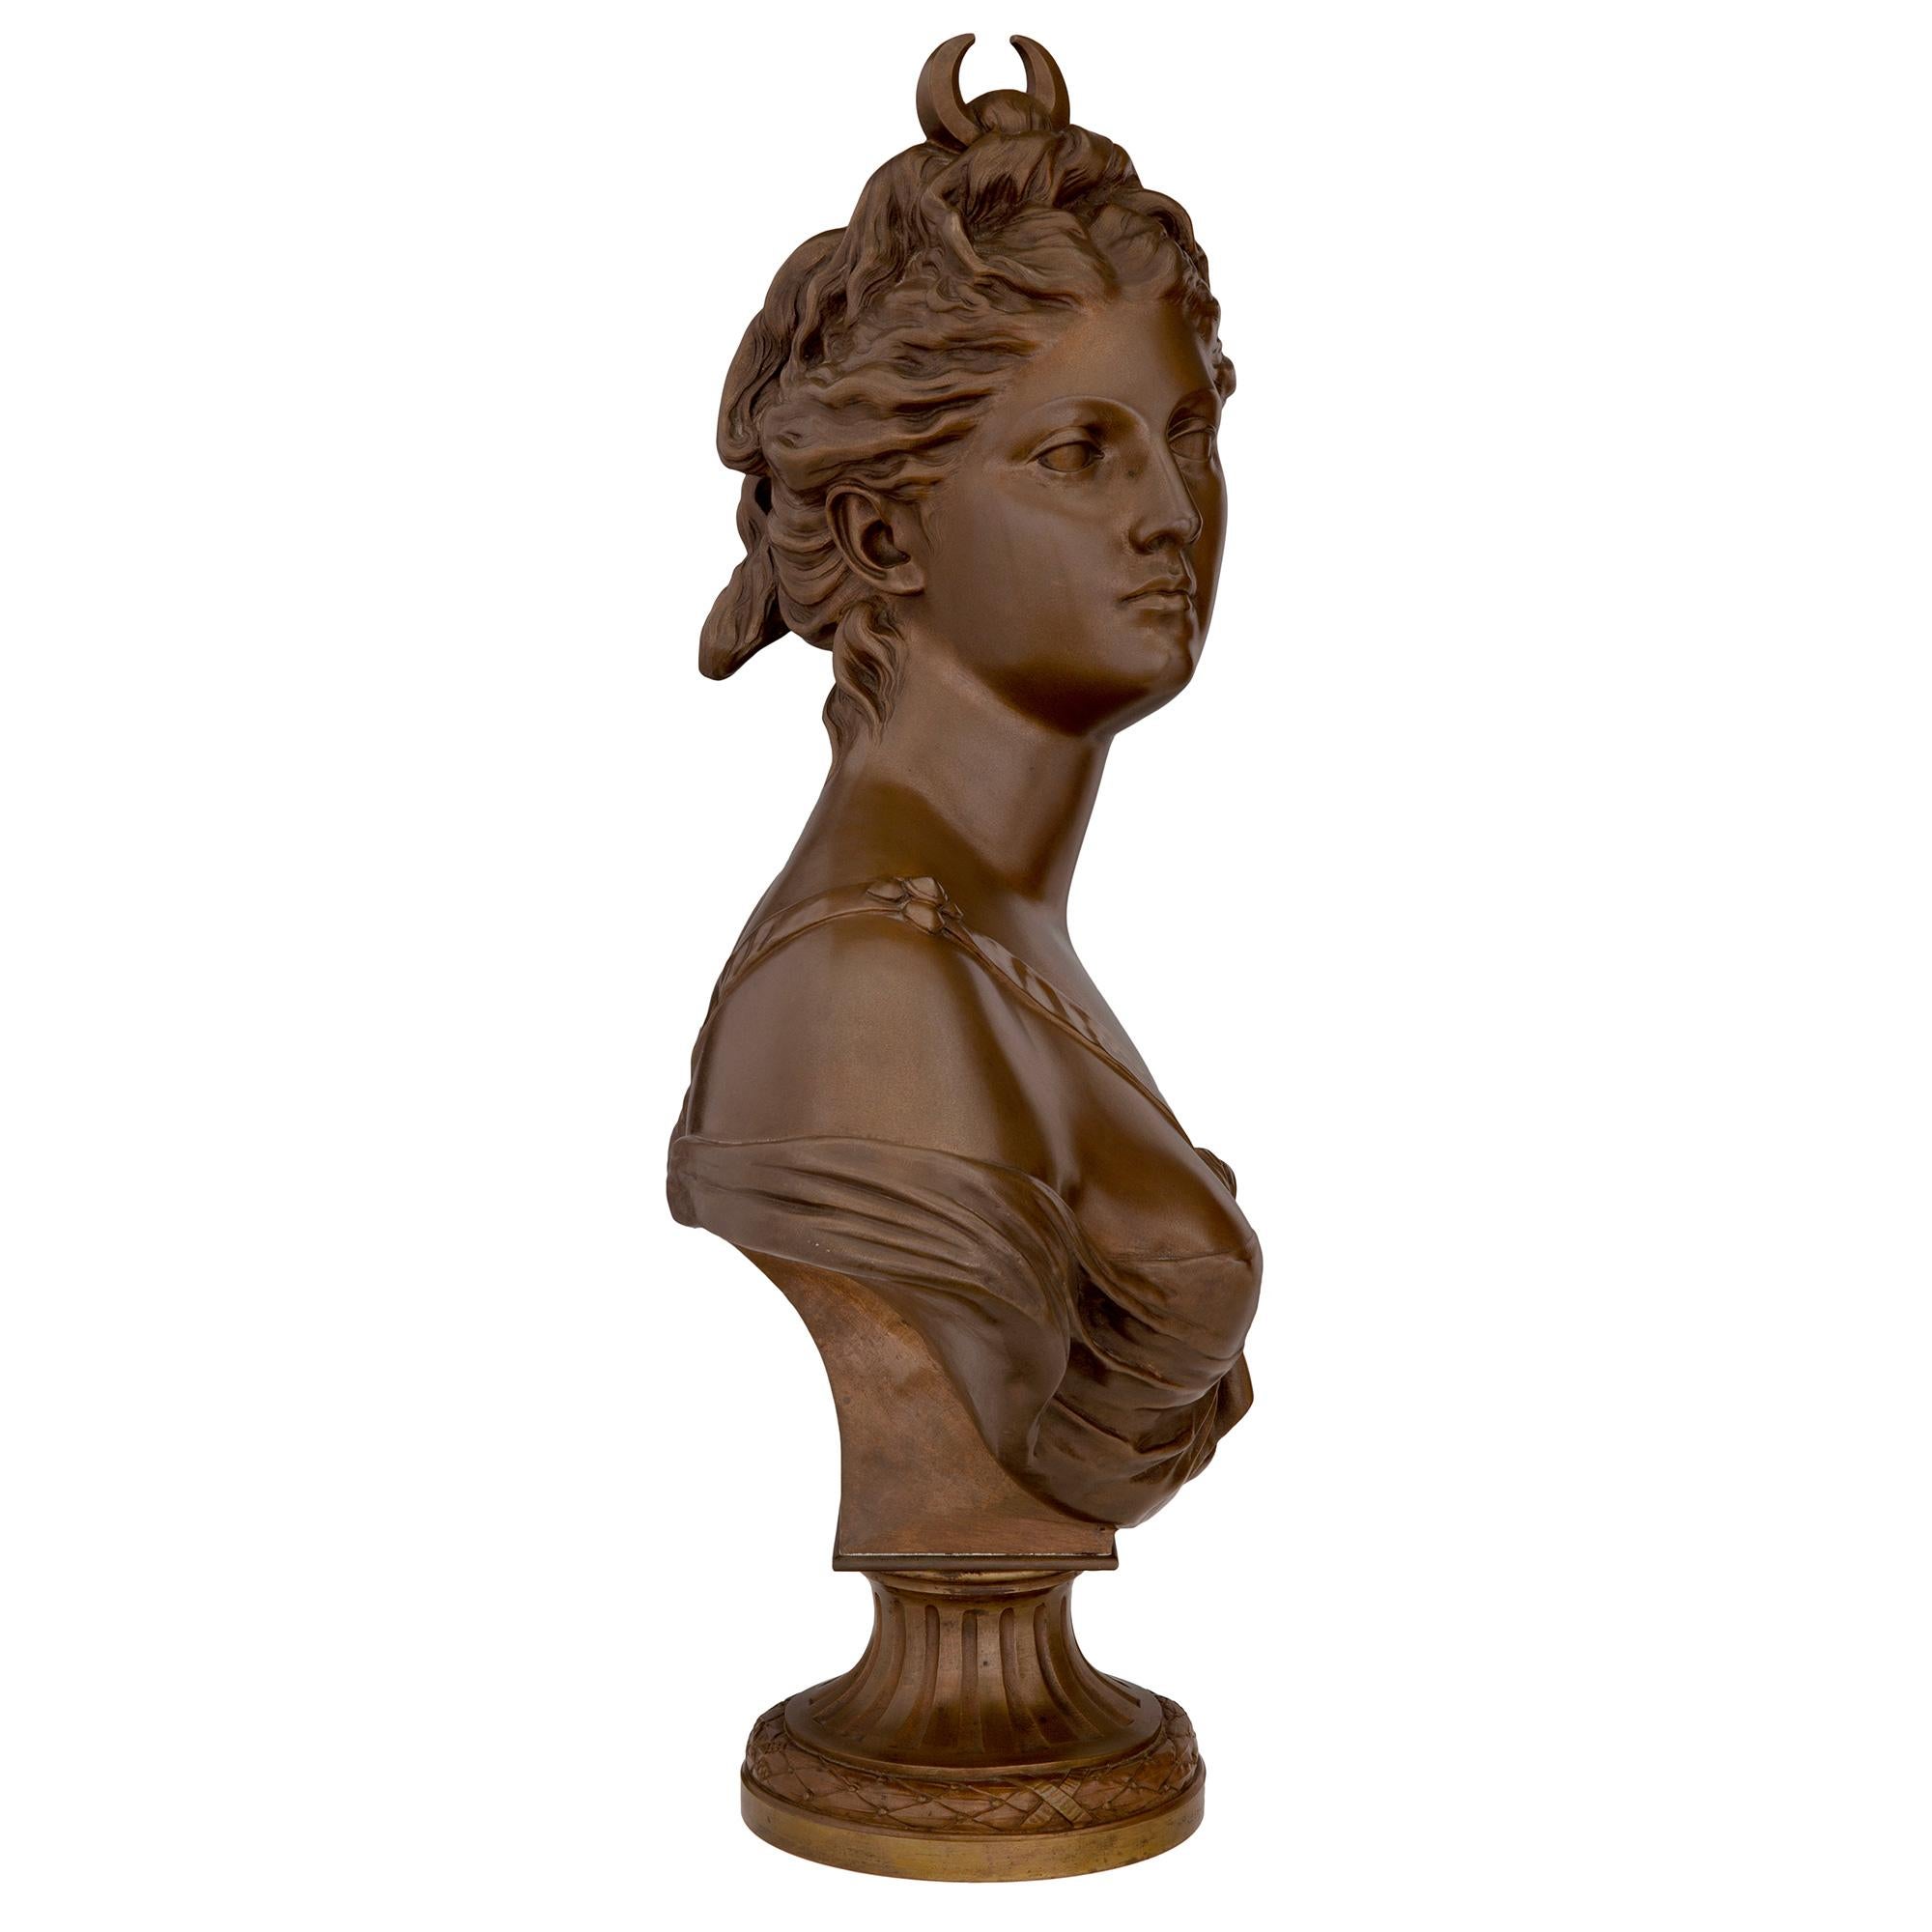 Patinated French 19th Century Louis XVI St. Bronze Bust of Diana the Huntress For Sale